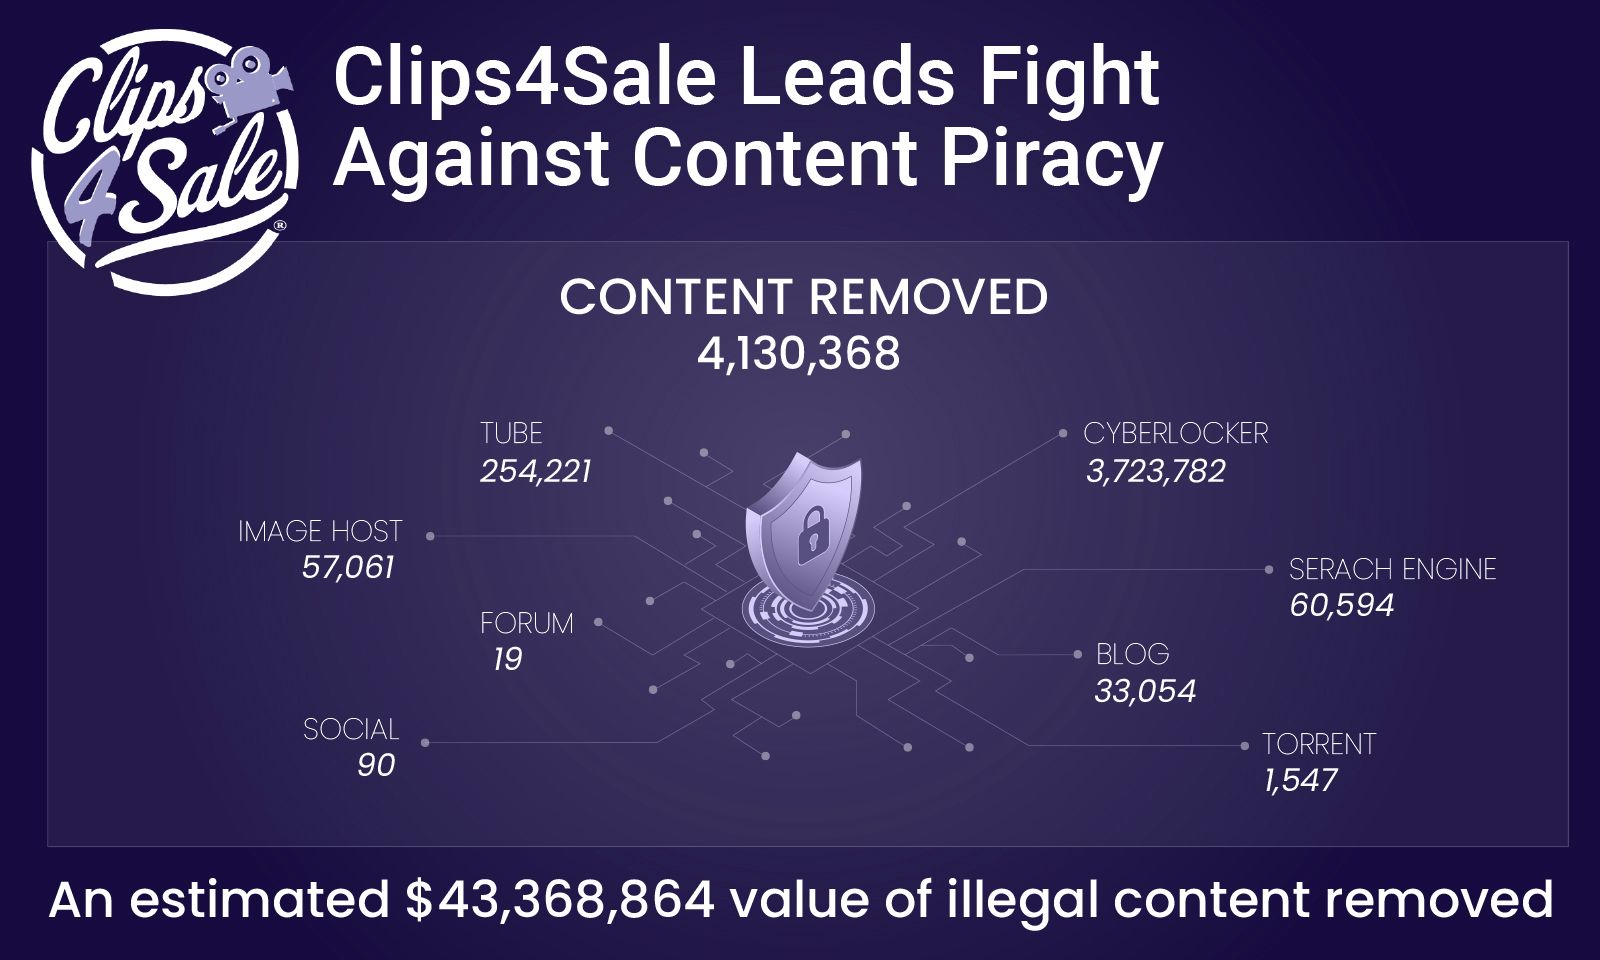 Clips4Sale Reports Huge Success in Takedown Piracy Backed Program